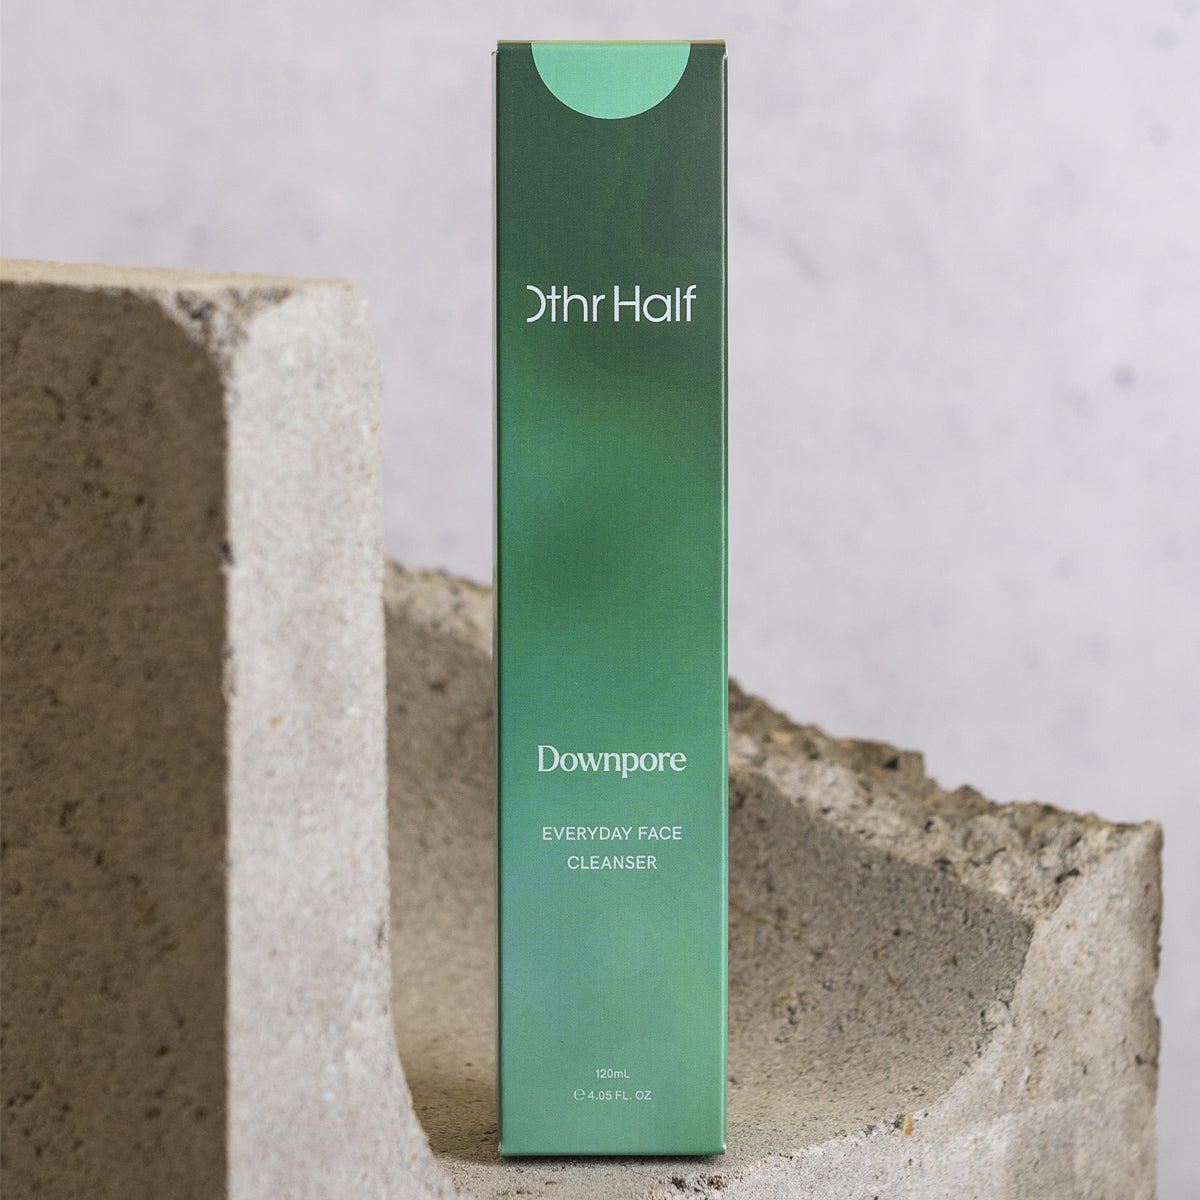 Downpore: Everyday Face Cleanser